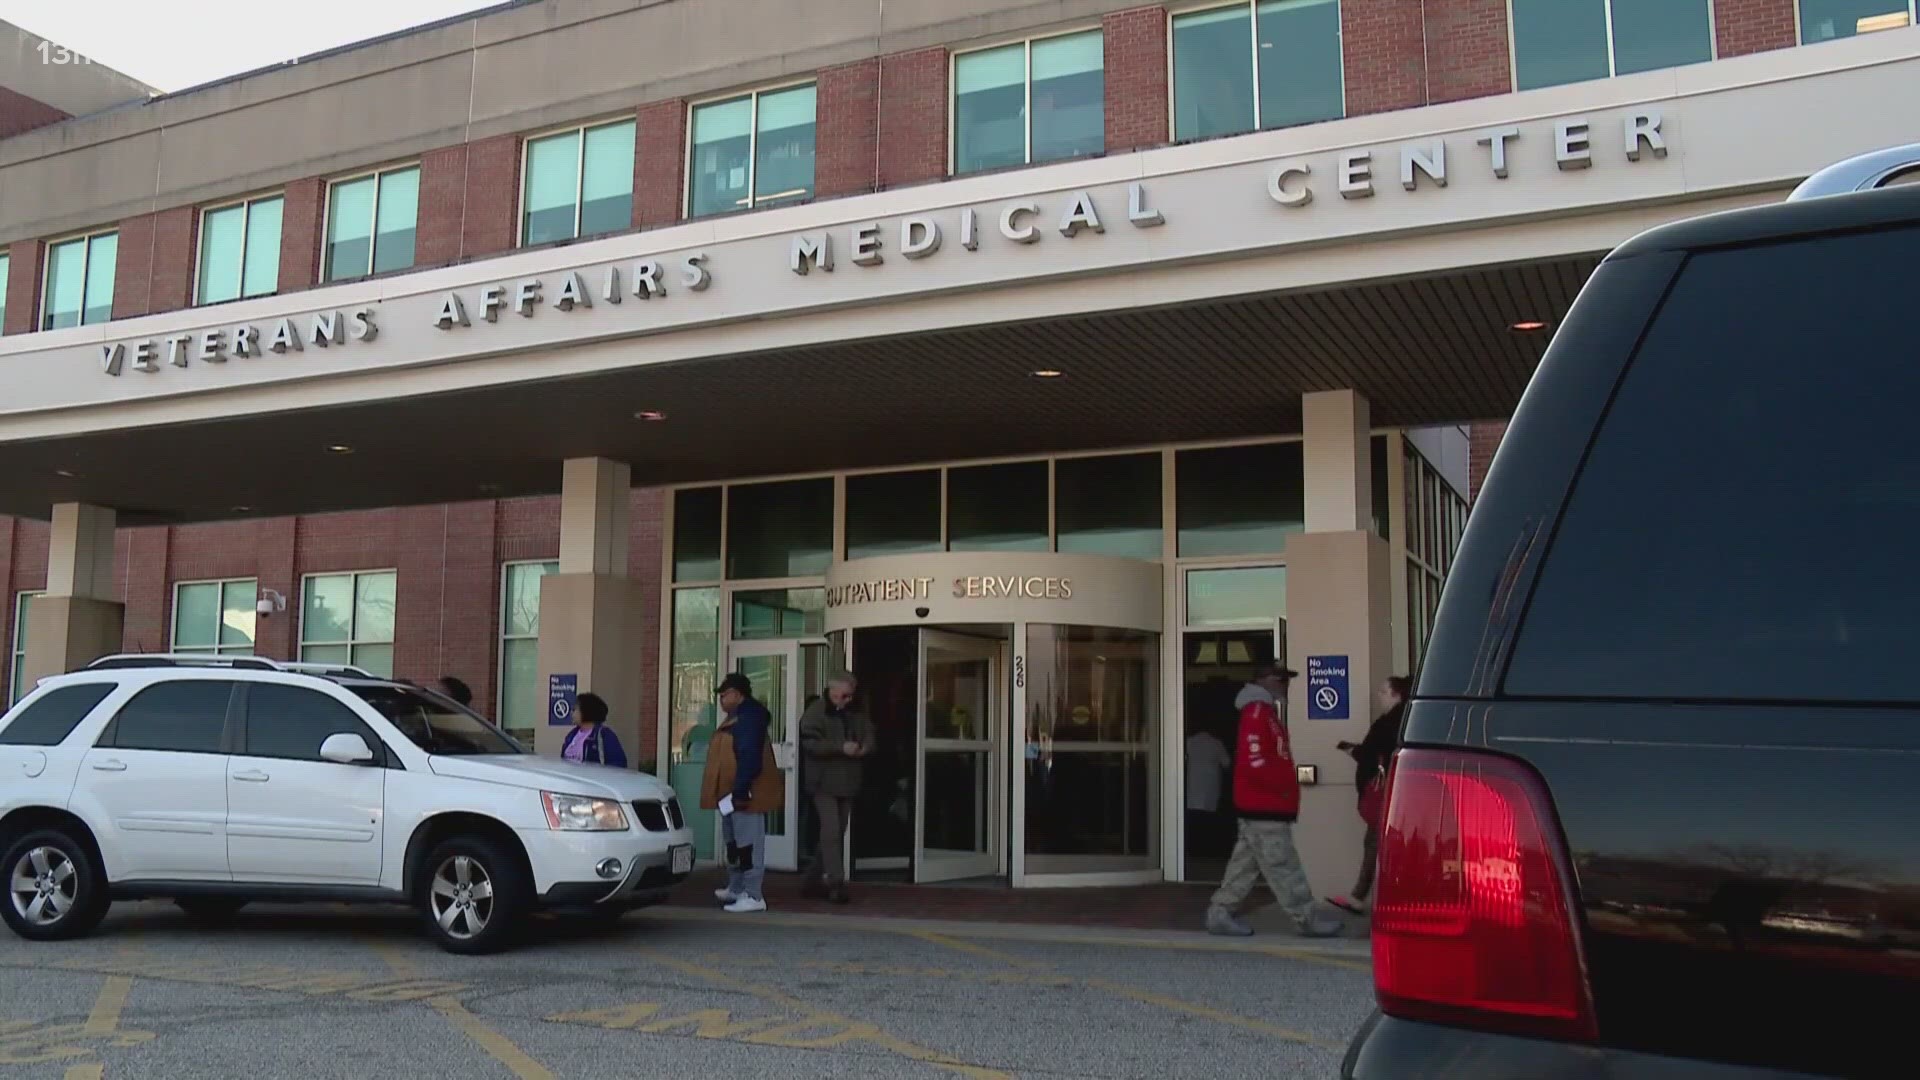 The lawmakers contend that there were "credible allegations" of retaliation being "commonplace" against VA employees who report patient safety concerns.